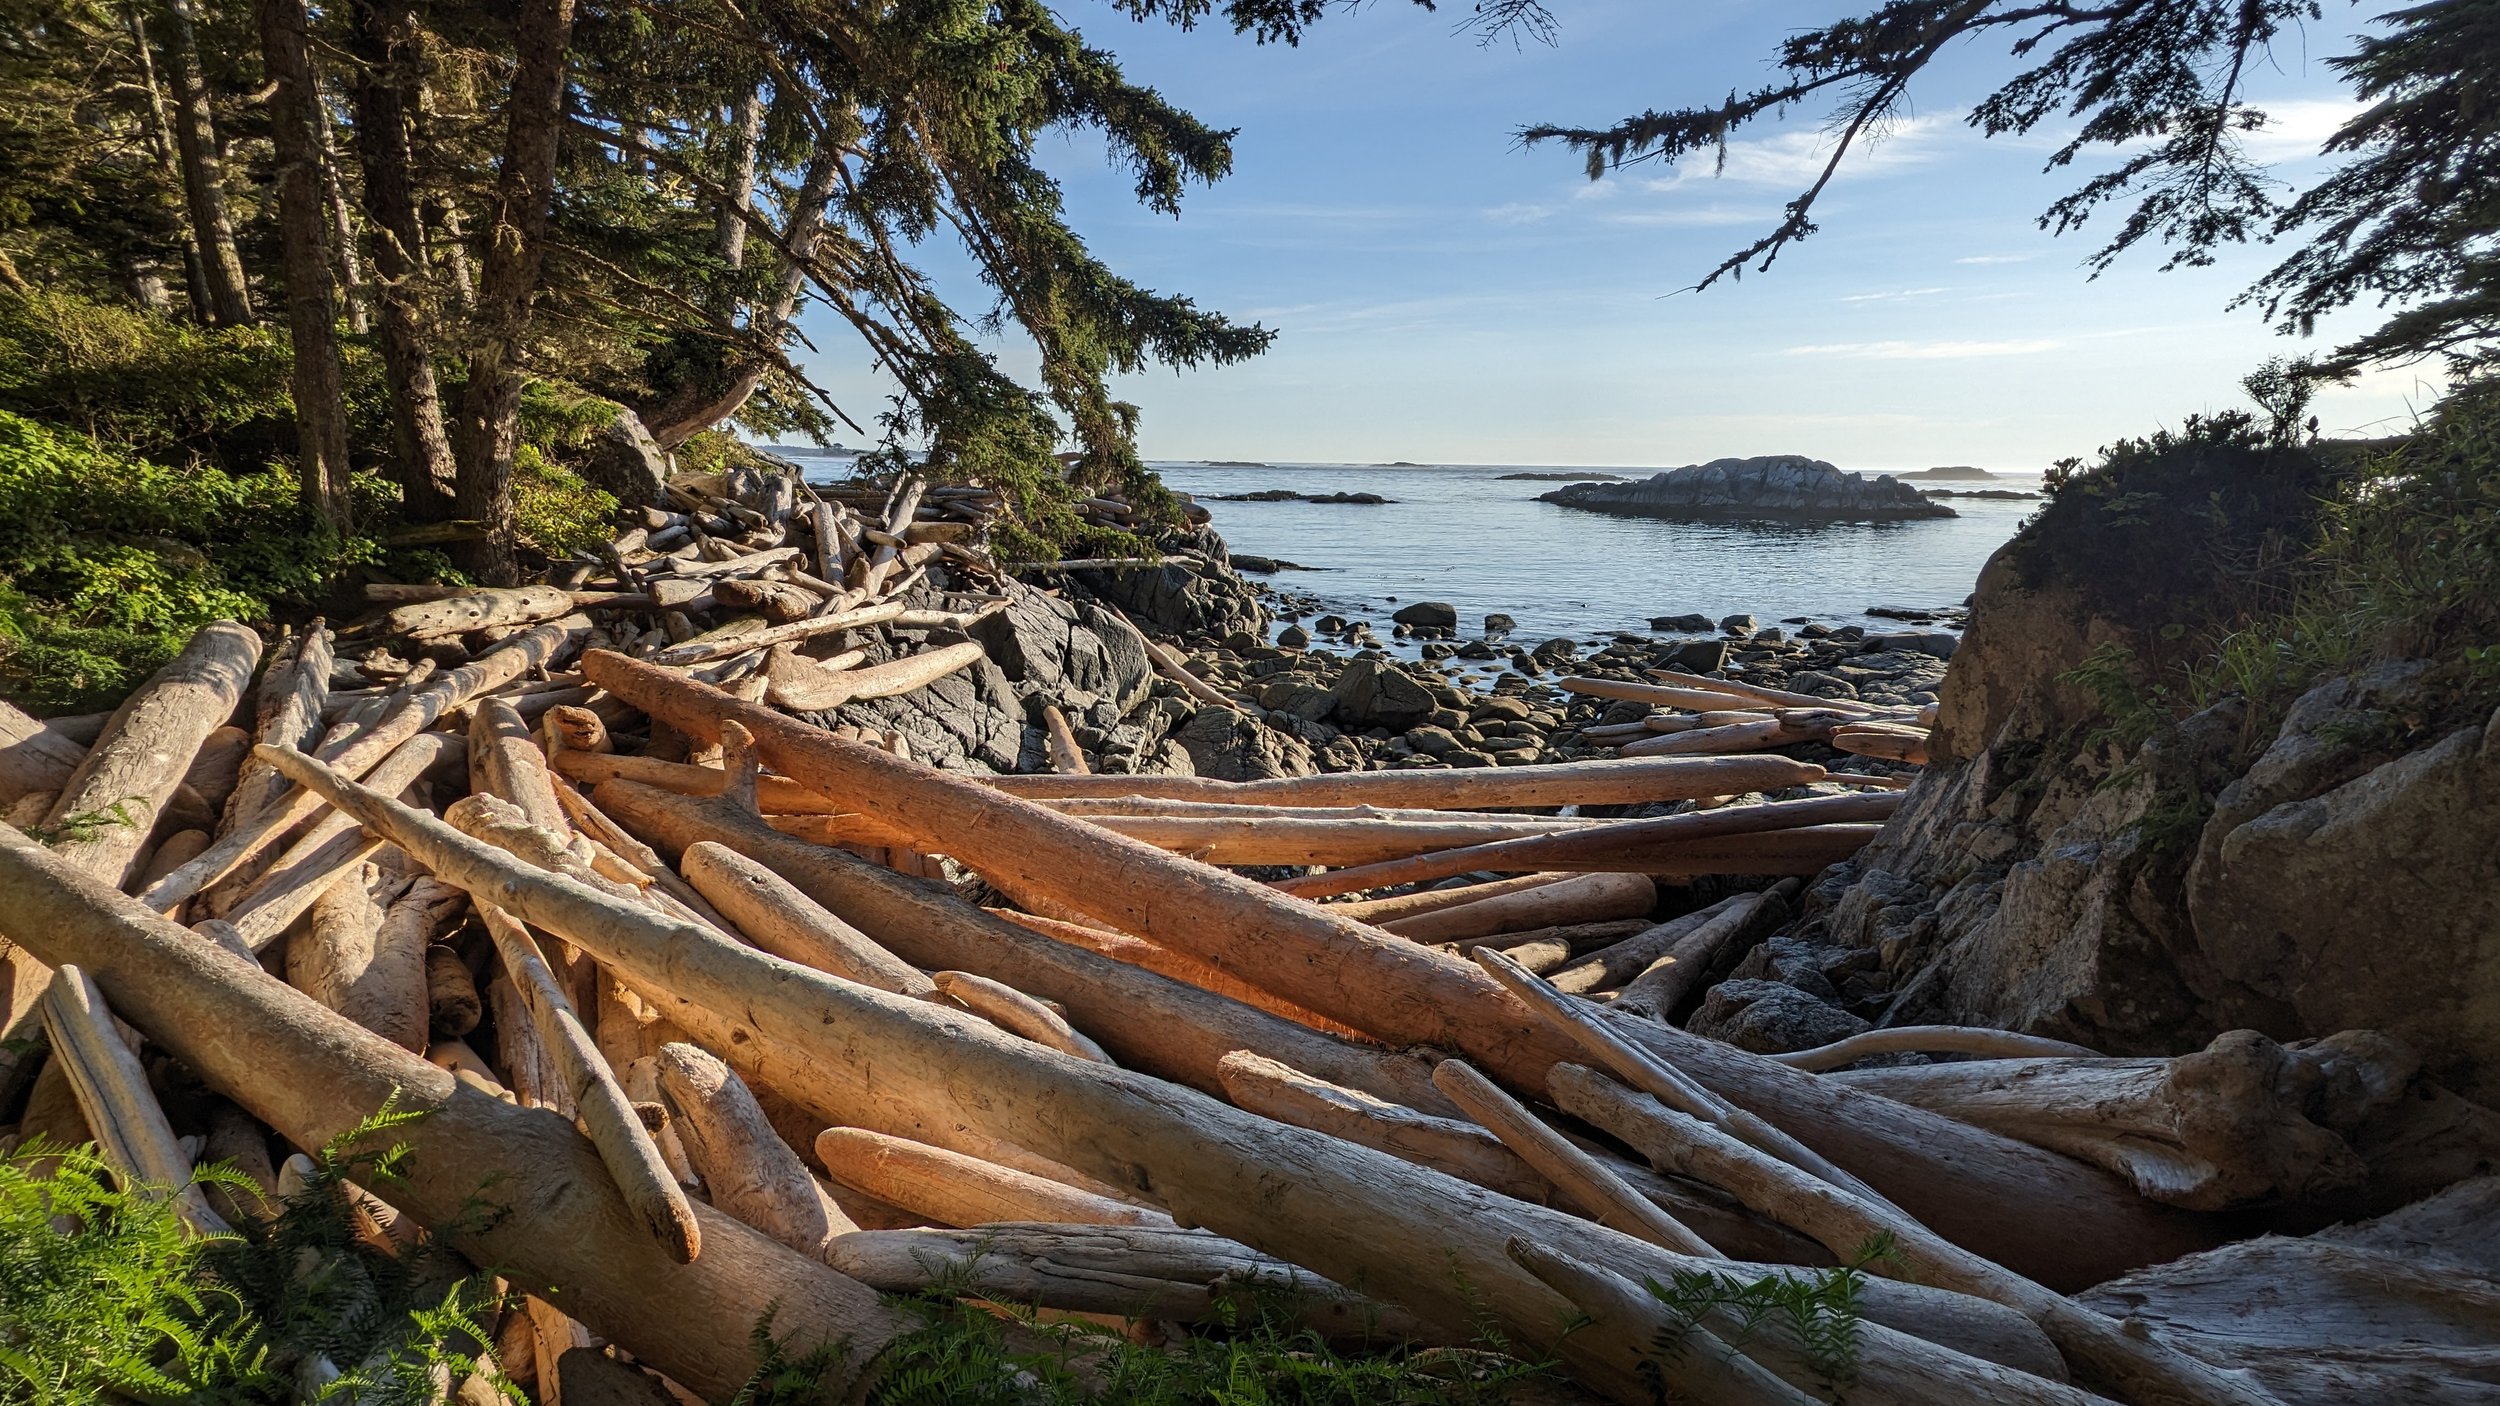  Driftwood washup on the West side of McMullin island. 